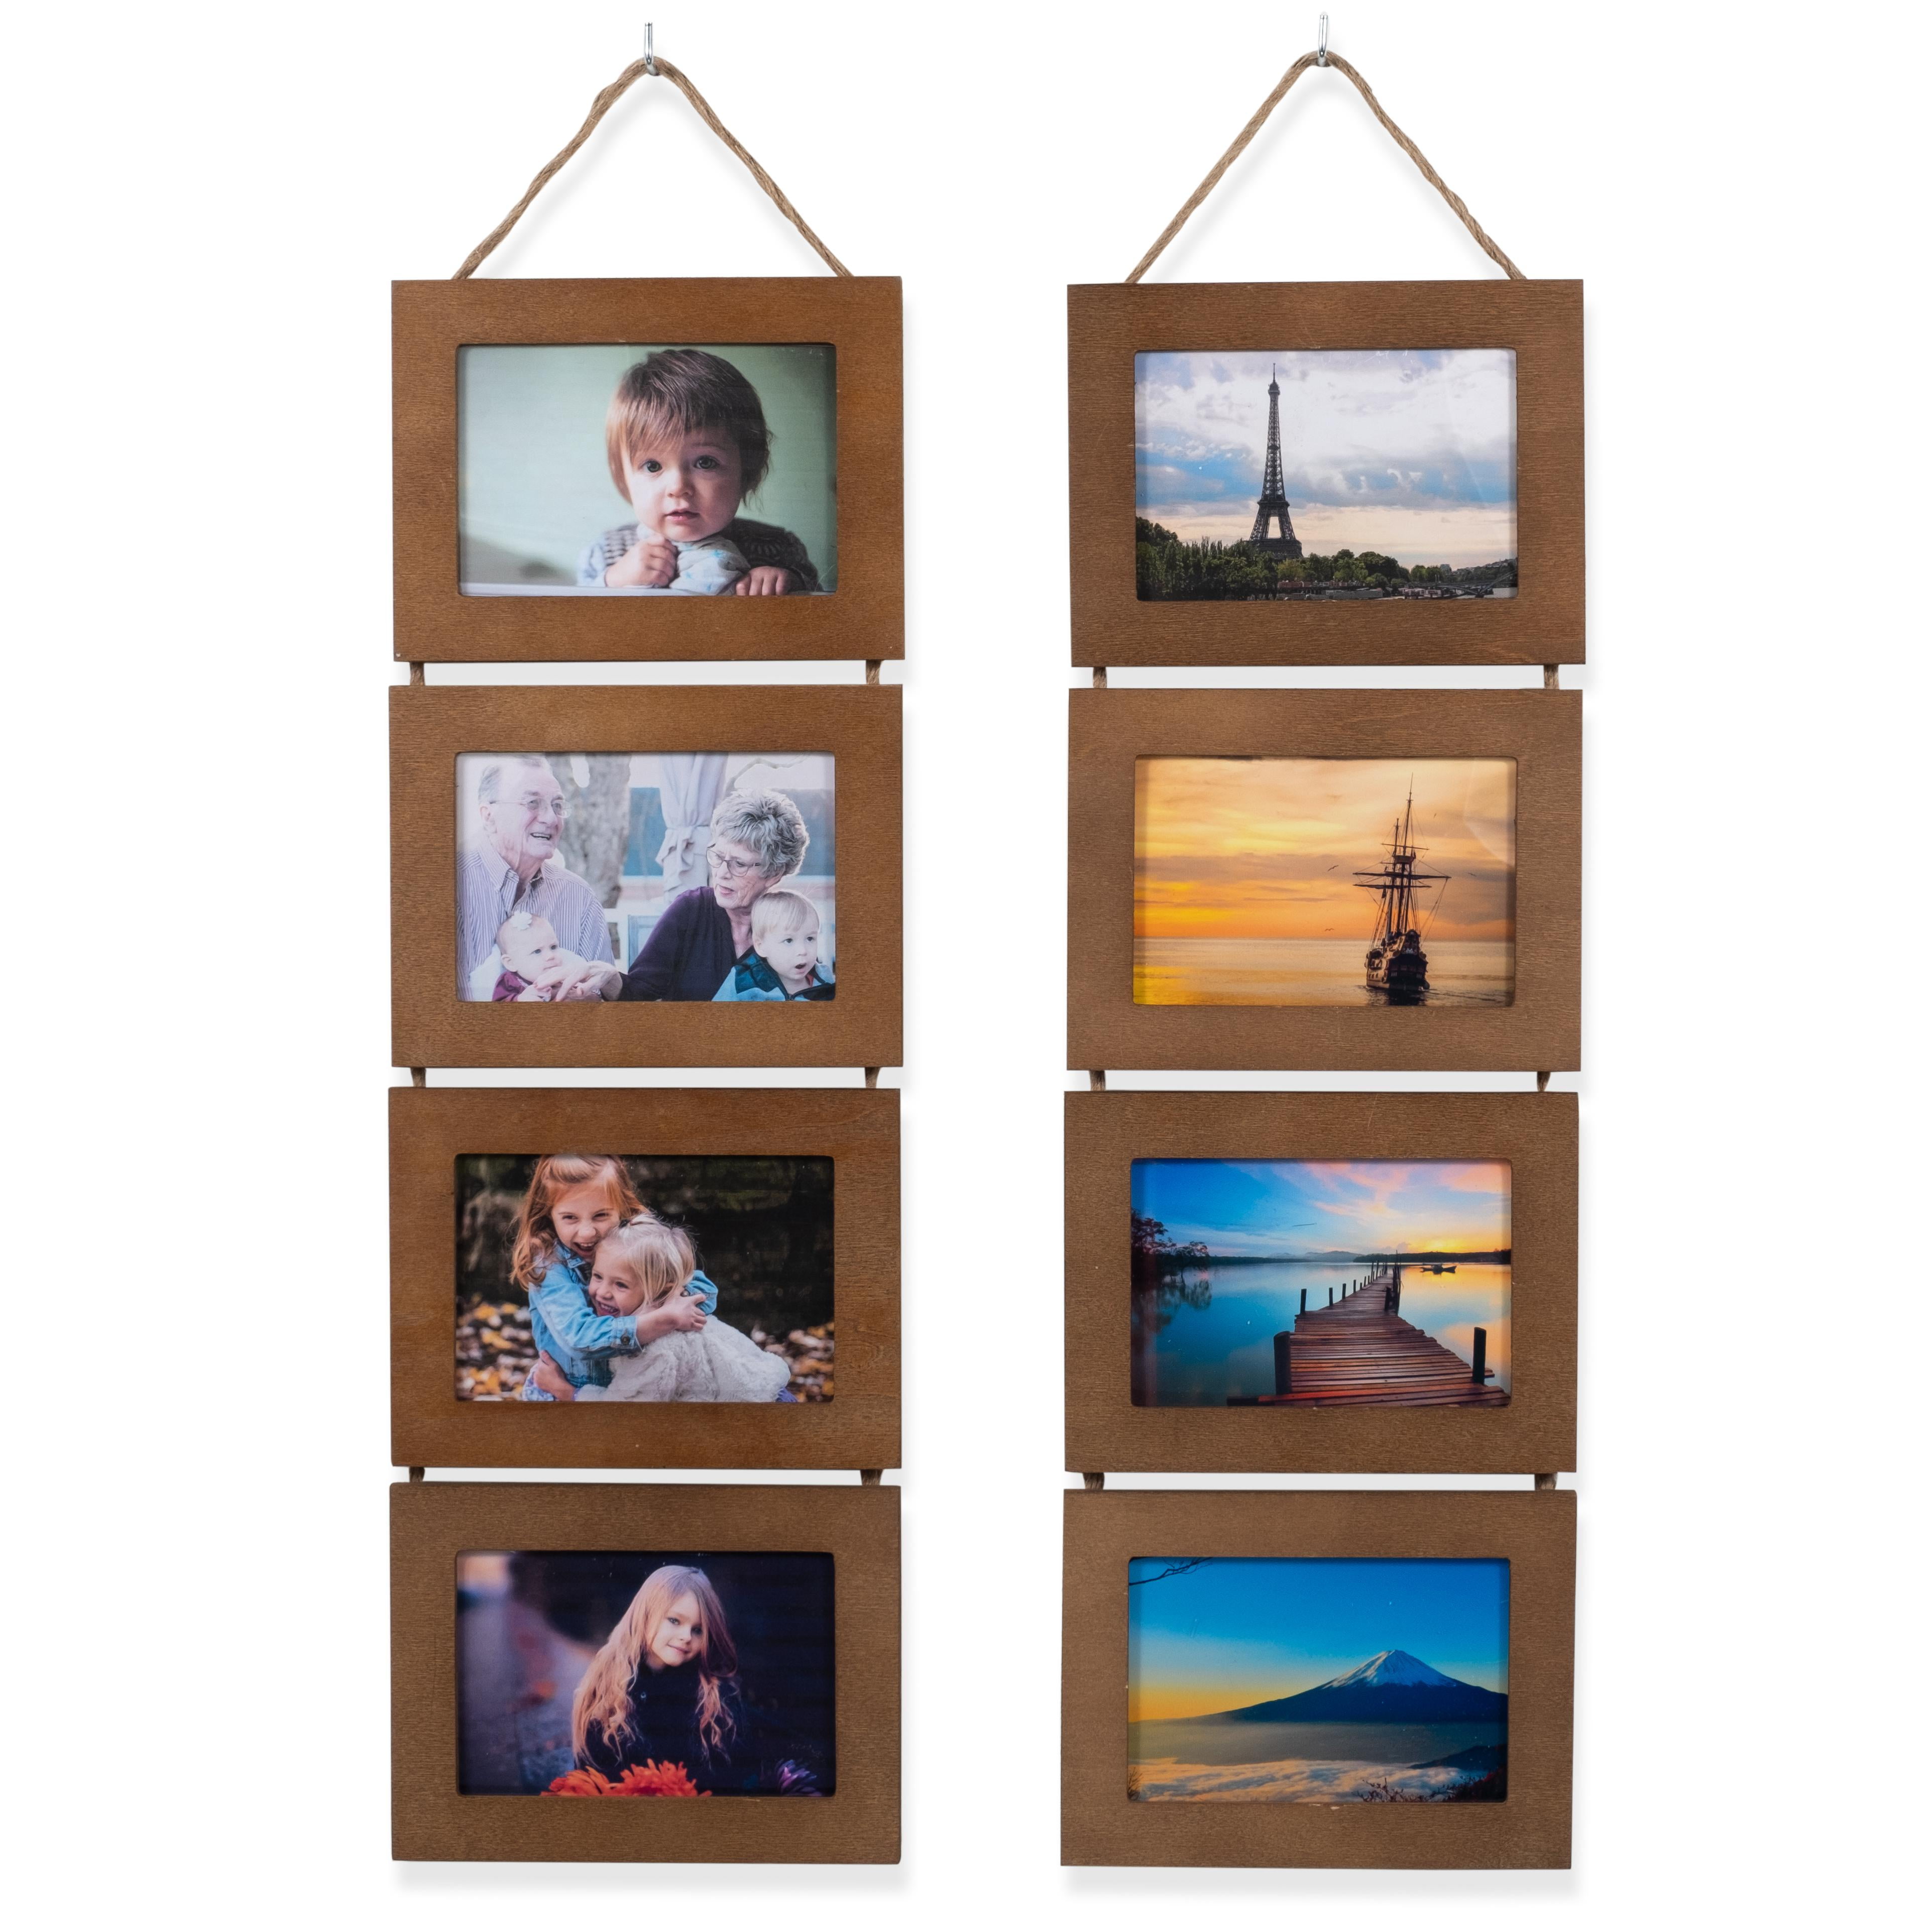 Wallniture DIY Unfinished Wood Wall Mounted Collage Picture Frames